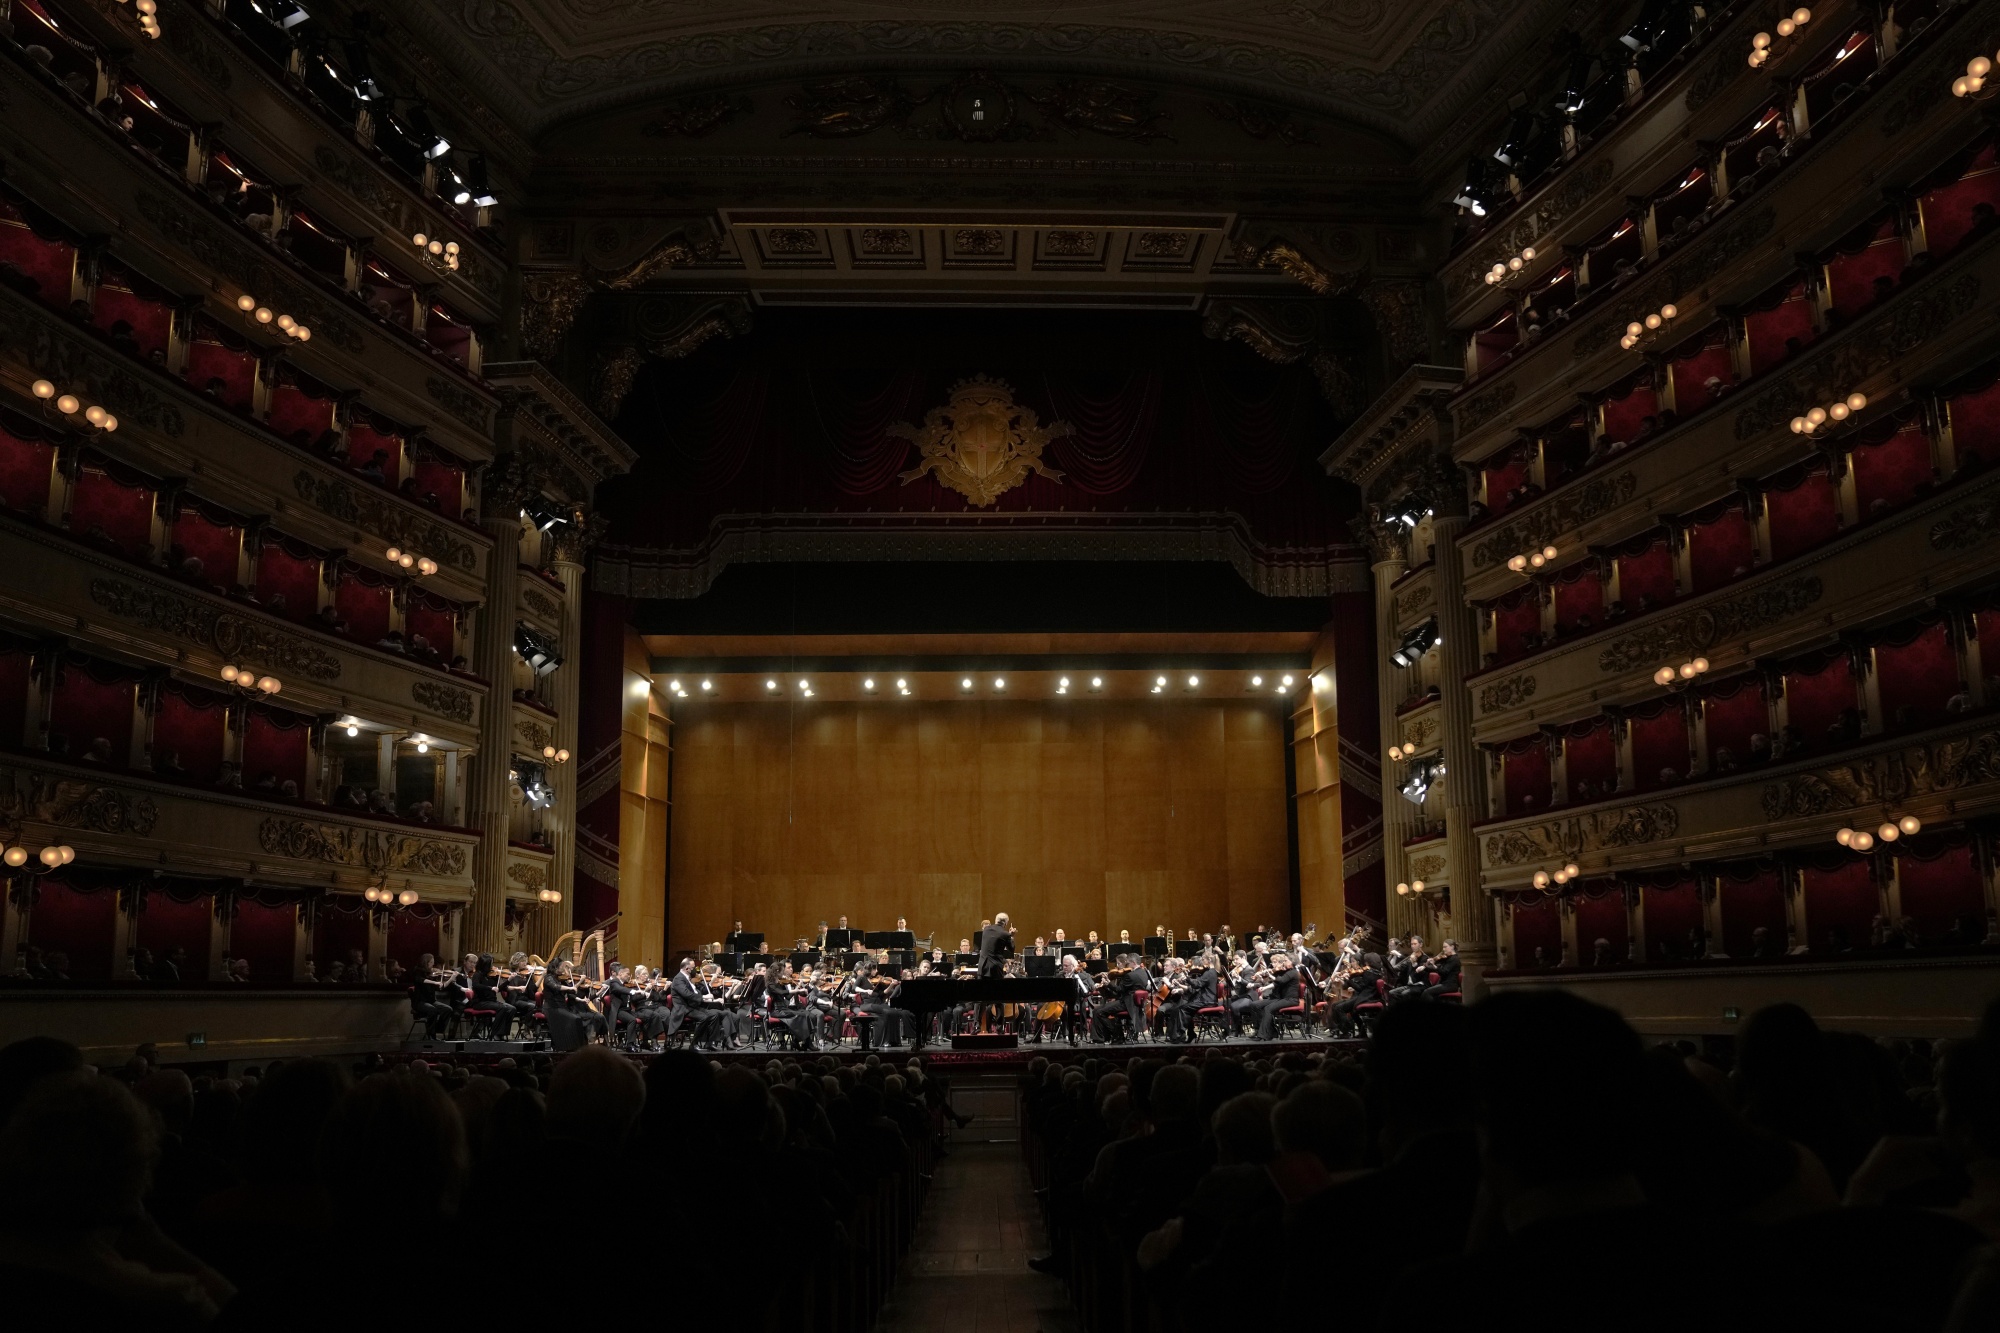 A triumphant return for Italian conductor Noseda as US orchestra receives  rare La Scala ovation - Bloomberg